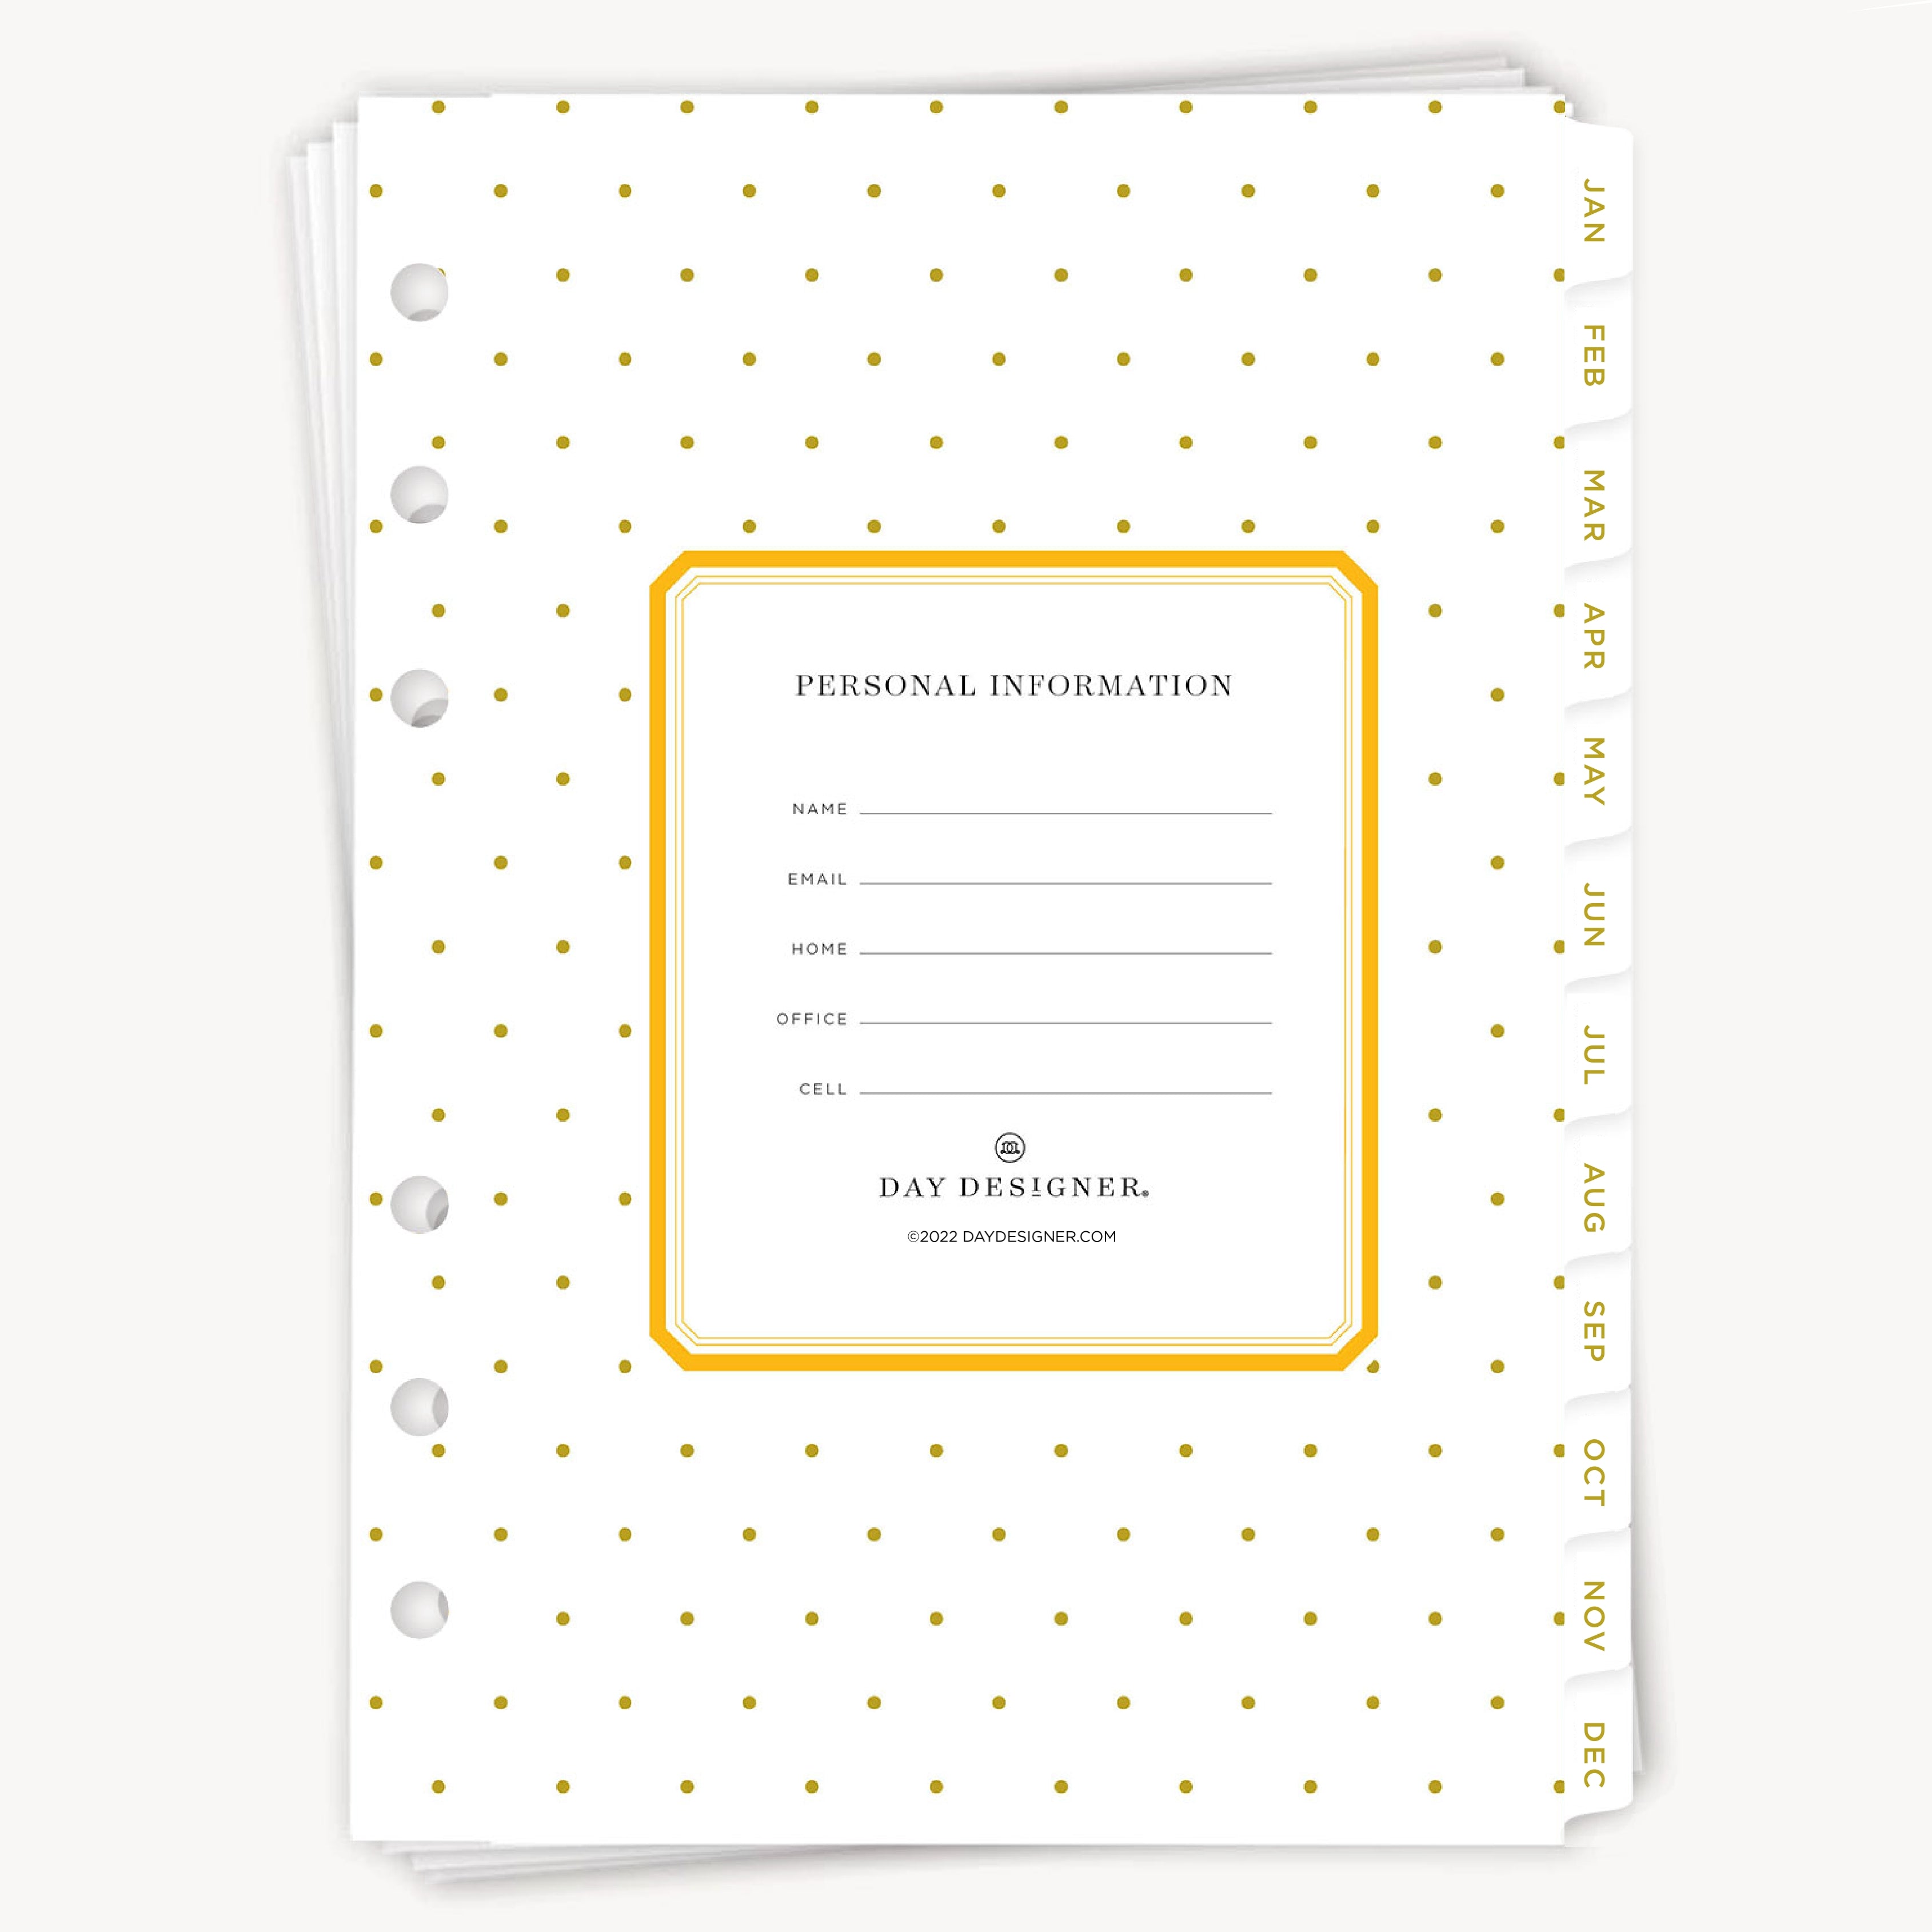 A5 Size Planner Recipe Inserts, A5 Size Meal Planning Inserts Fits with  Kate Spade A5, Louis Vuitton GM, Carpe Diem, Color Crush, Filofax (Planner